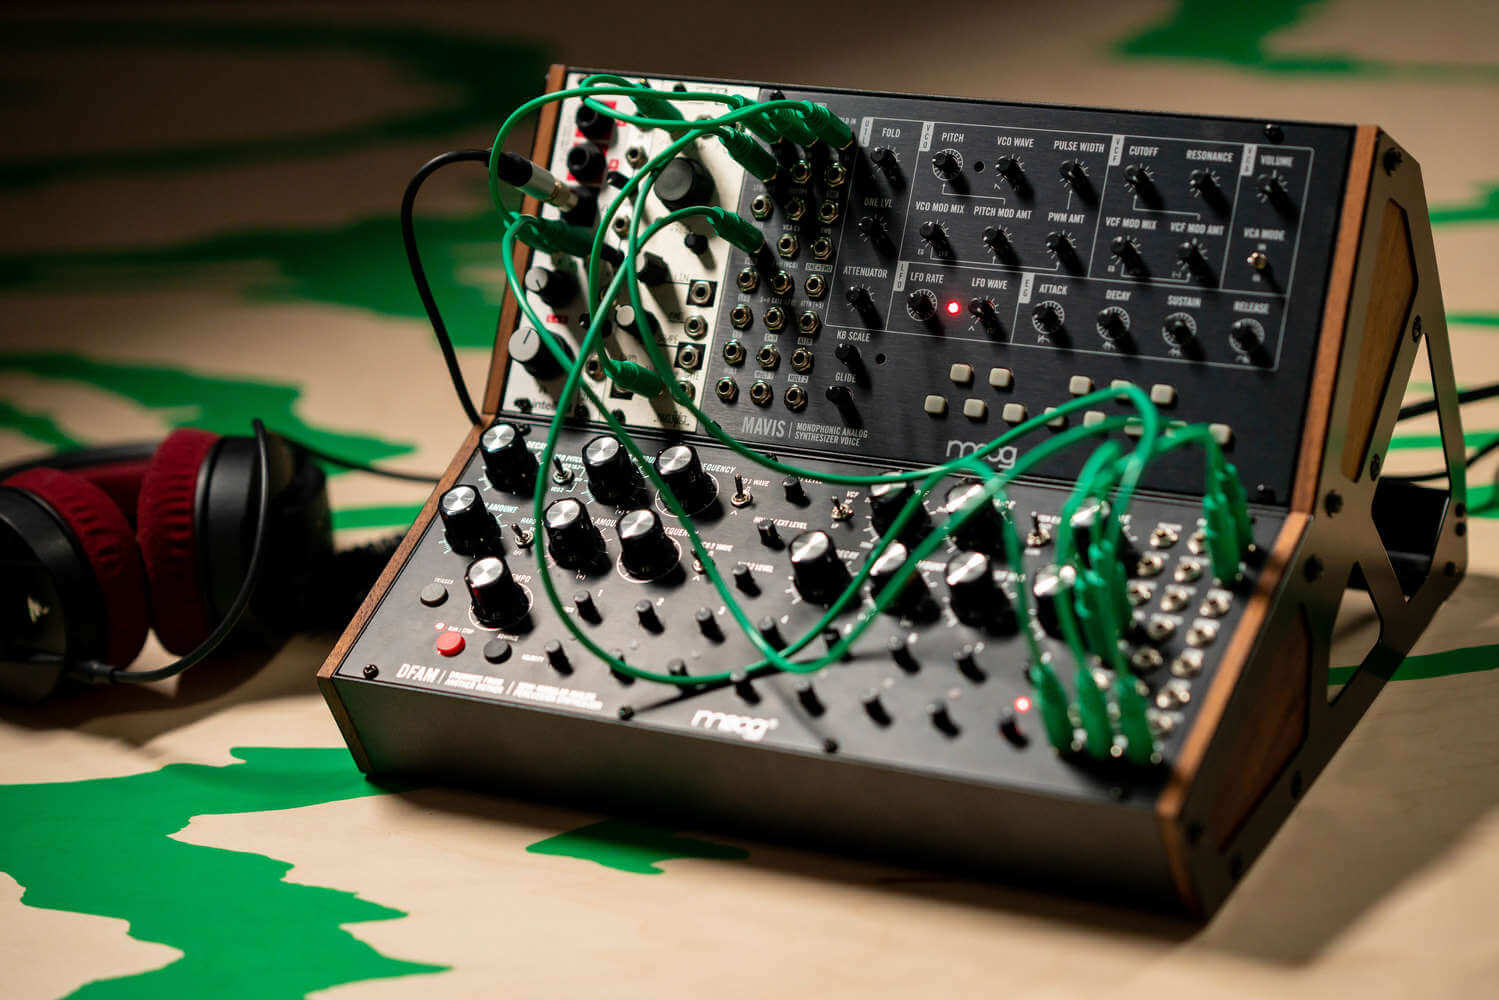 The Moog Mavis will fit into a Eurorack with its size of 44 HP. 